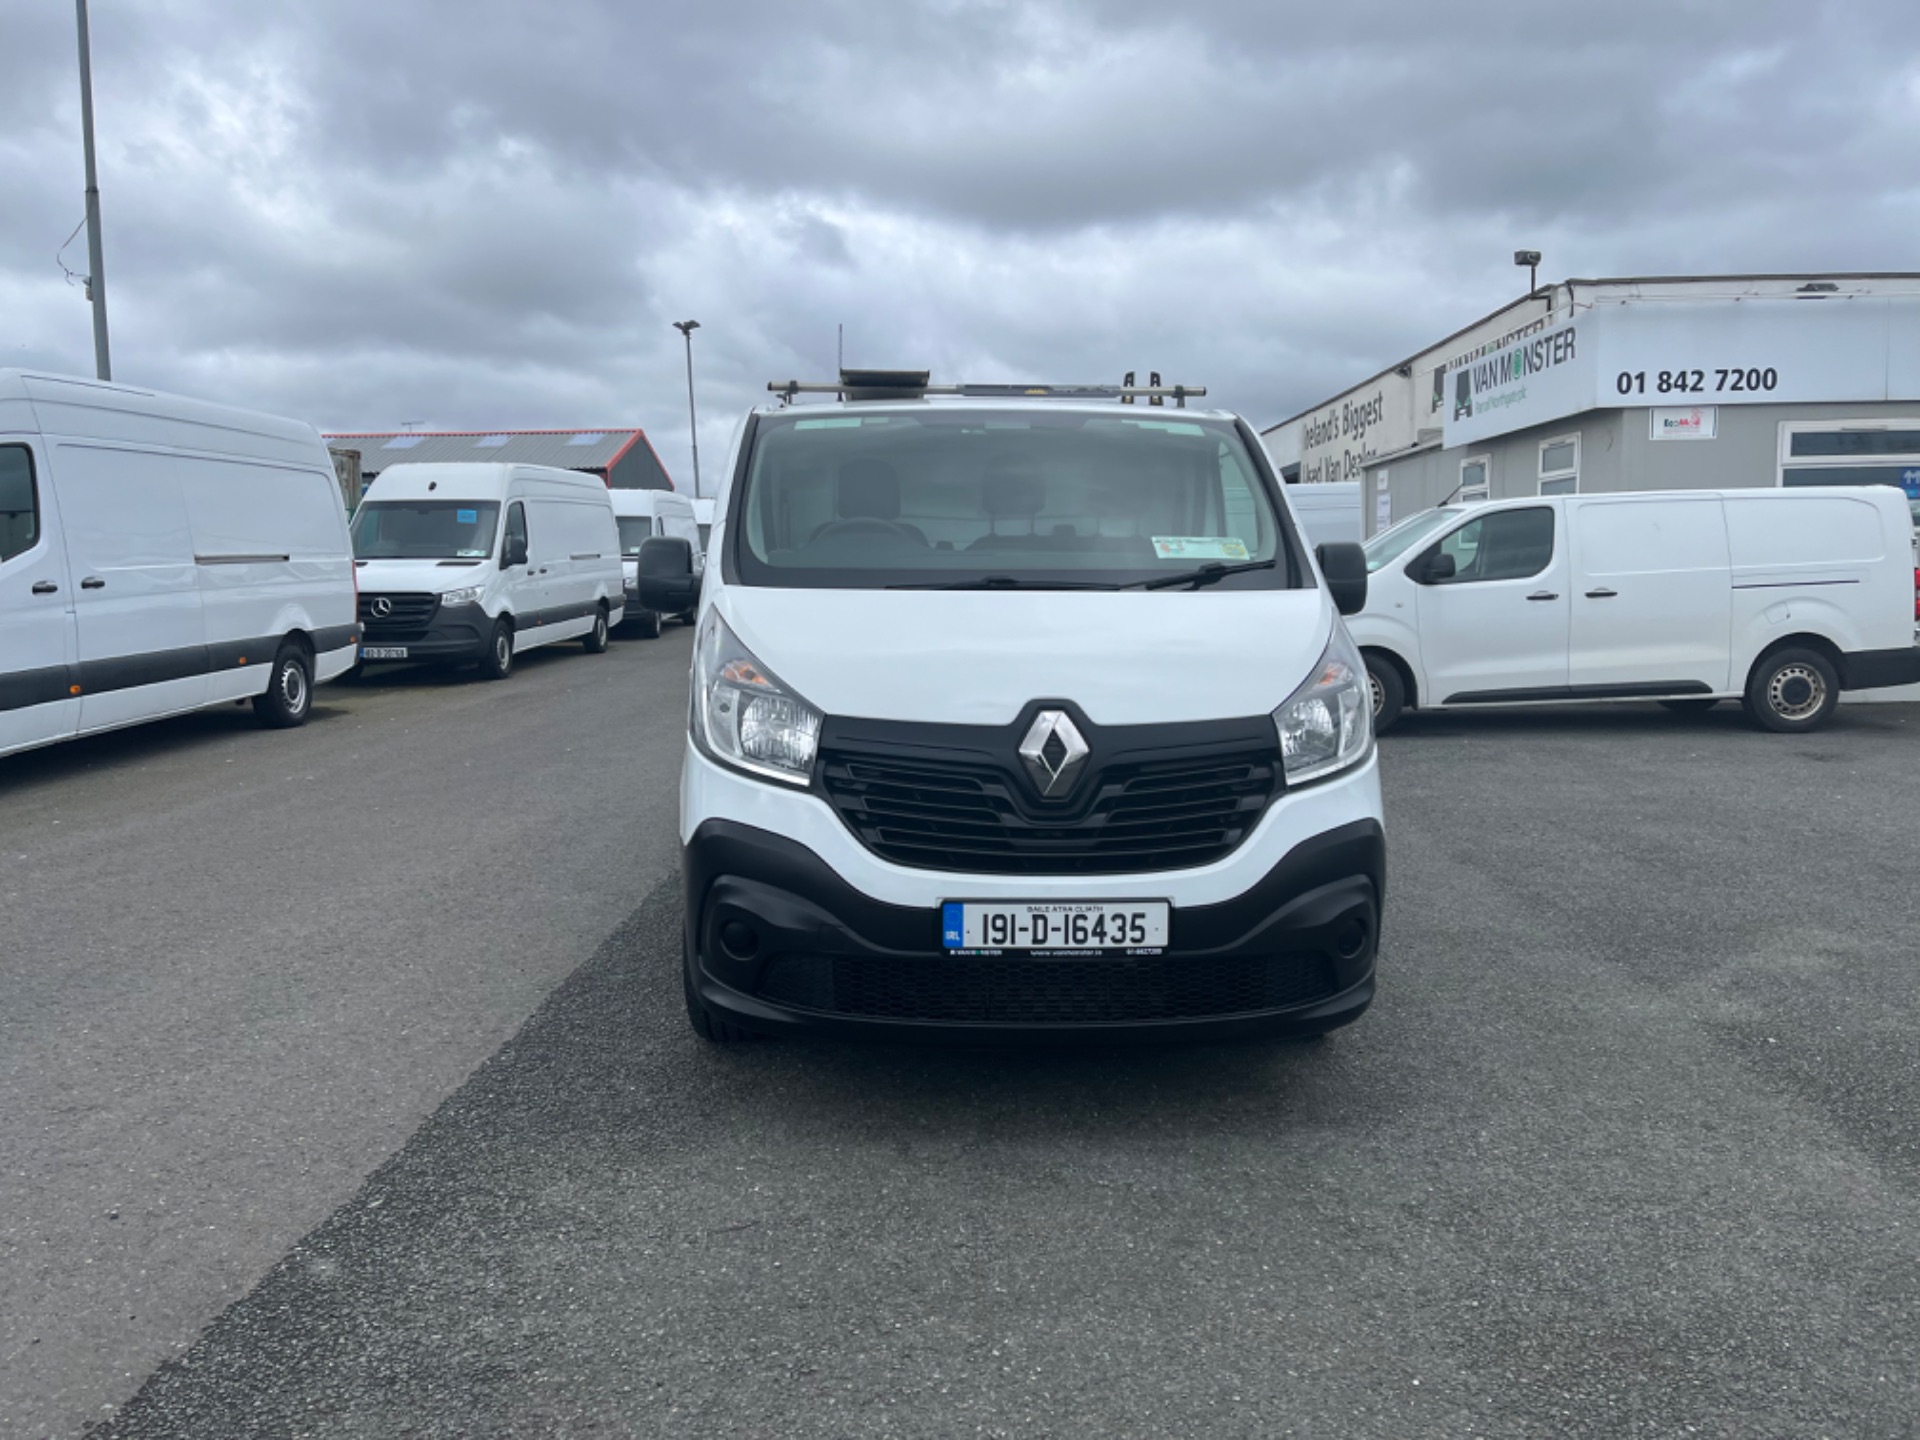 2019 Renault Trafic LL29 DCI 120 Business (191D16435) Thumbnail 1